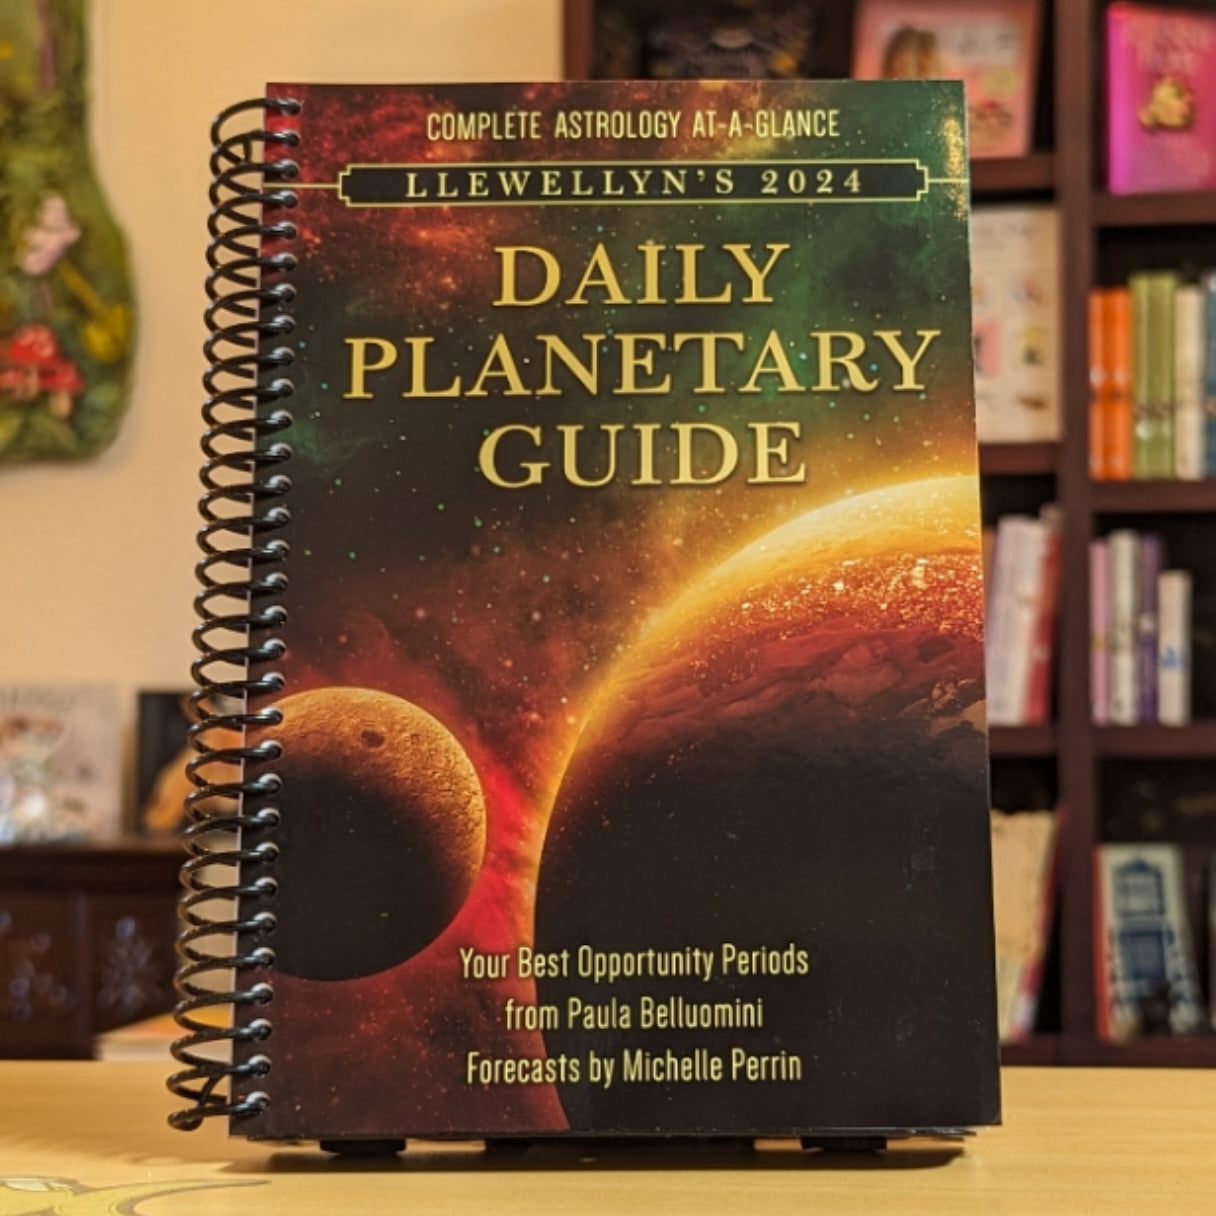 Llewellyn's 2024 Daily Planetary Guide: Complete Astrology At-A-Glance (Llewellyn's Daily Planetary Guides)